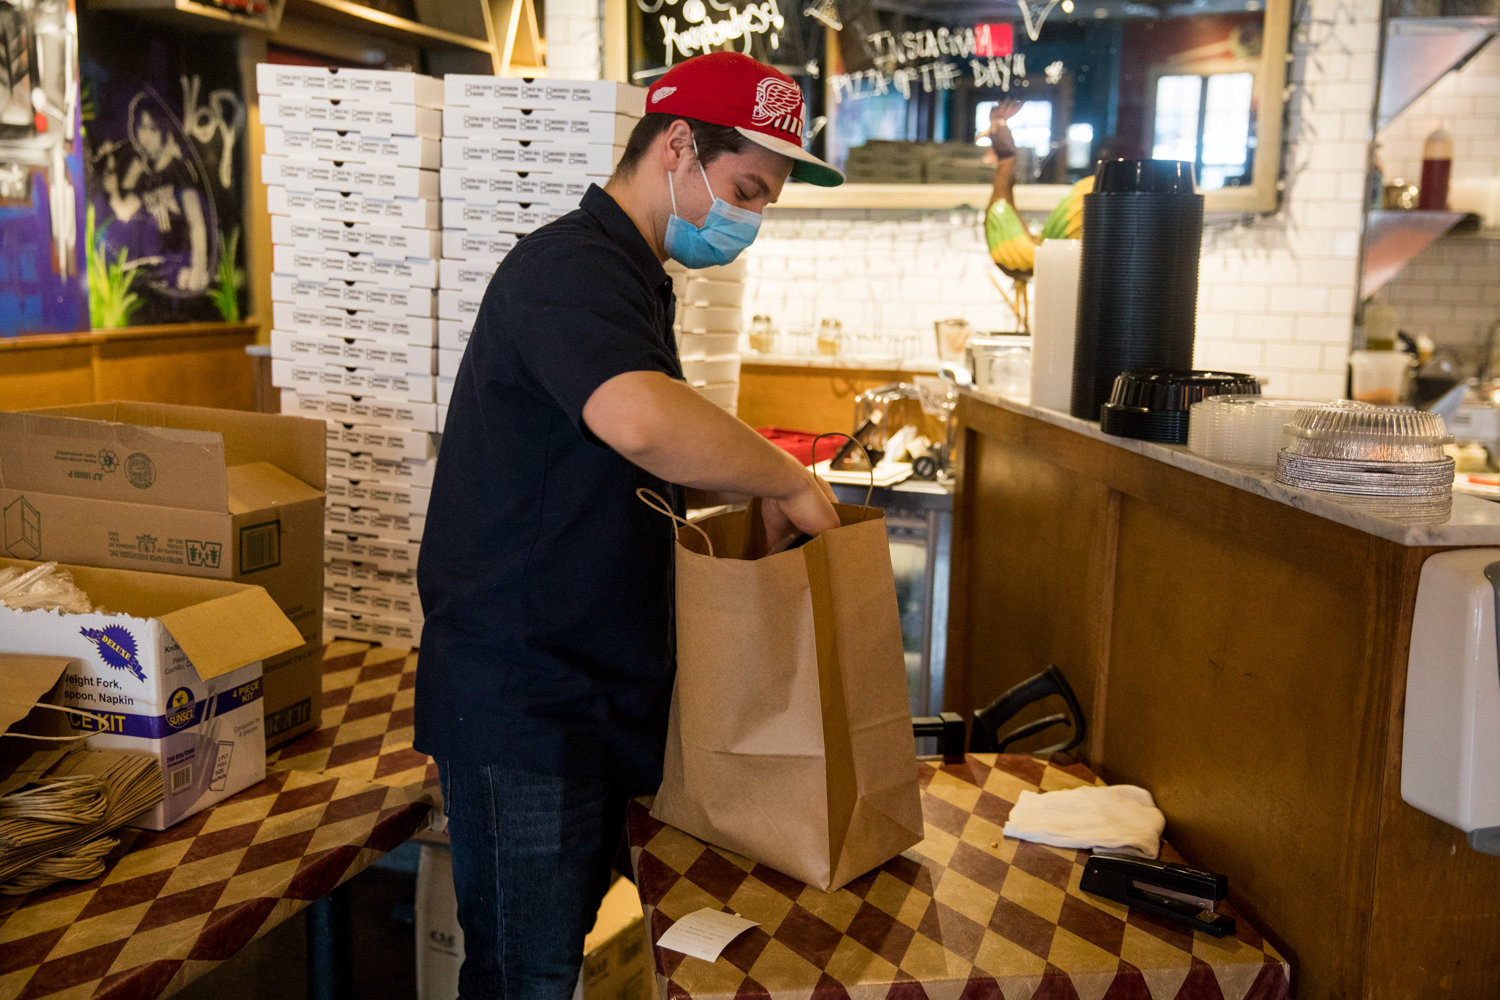 Ben Avery bags a customer’s order inside Kingsbridge Social Club, which has managed to stay in business despite the coronavirus pandemic. Restaurants have been moved up to the second phase of the state’s reopening plan for the city, but that will require outdoor seating.